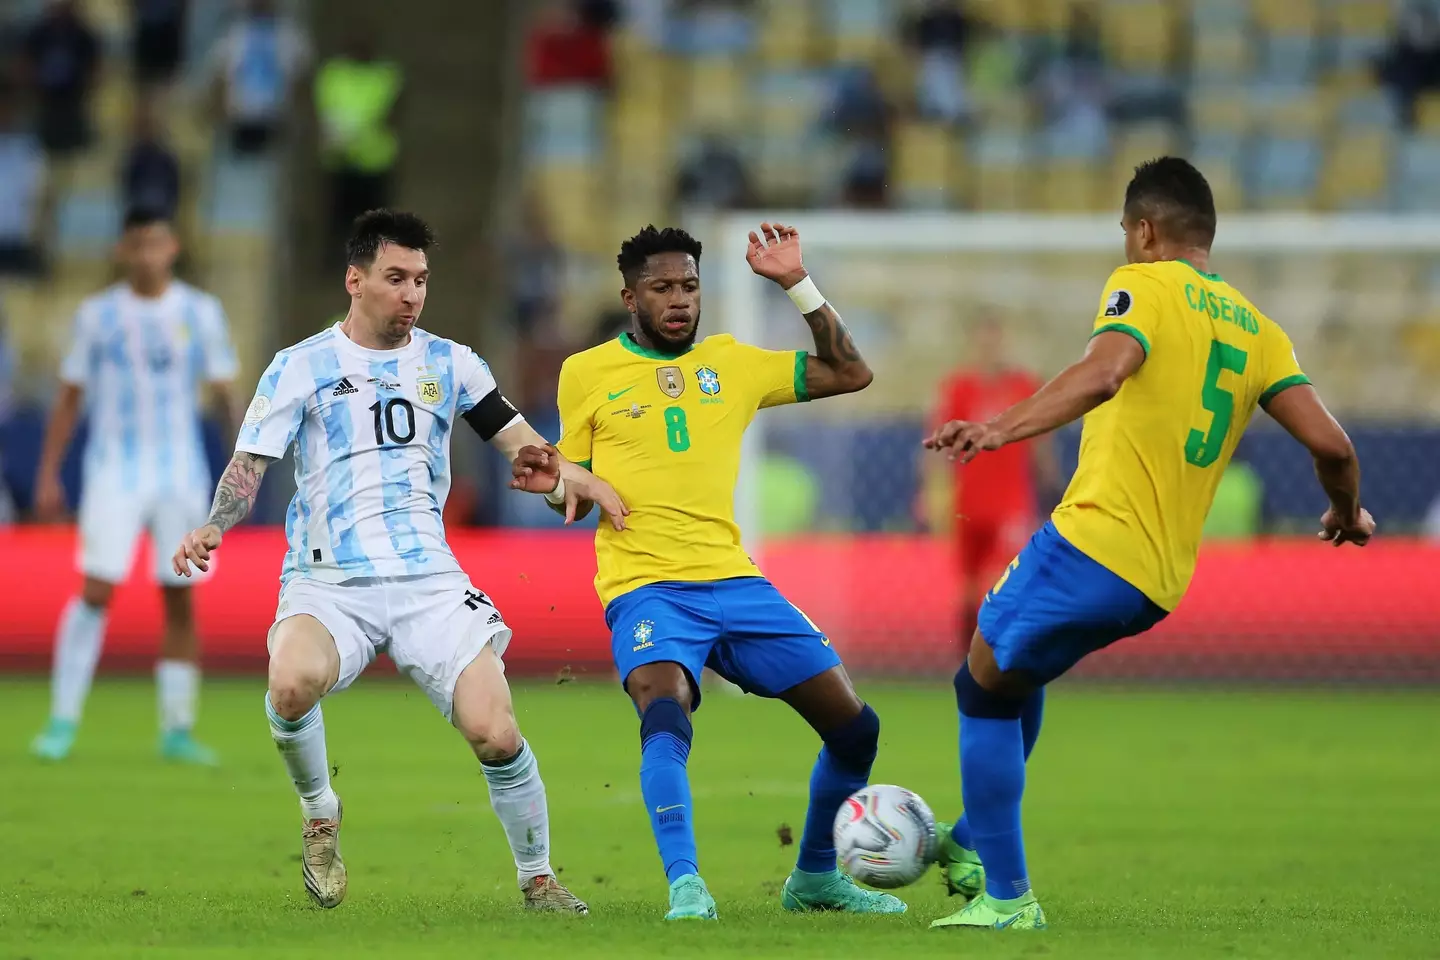 Fred and Casemiro for Brazil against Lionel Messi and Argentina. (Alamy)